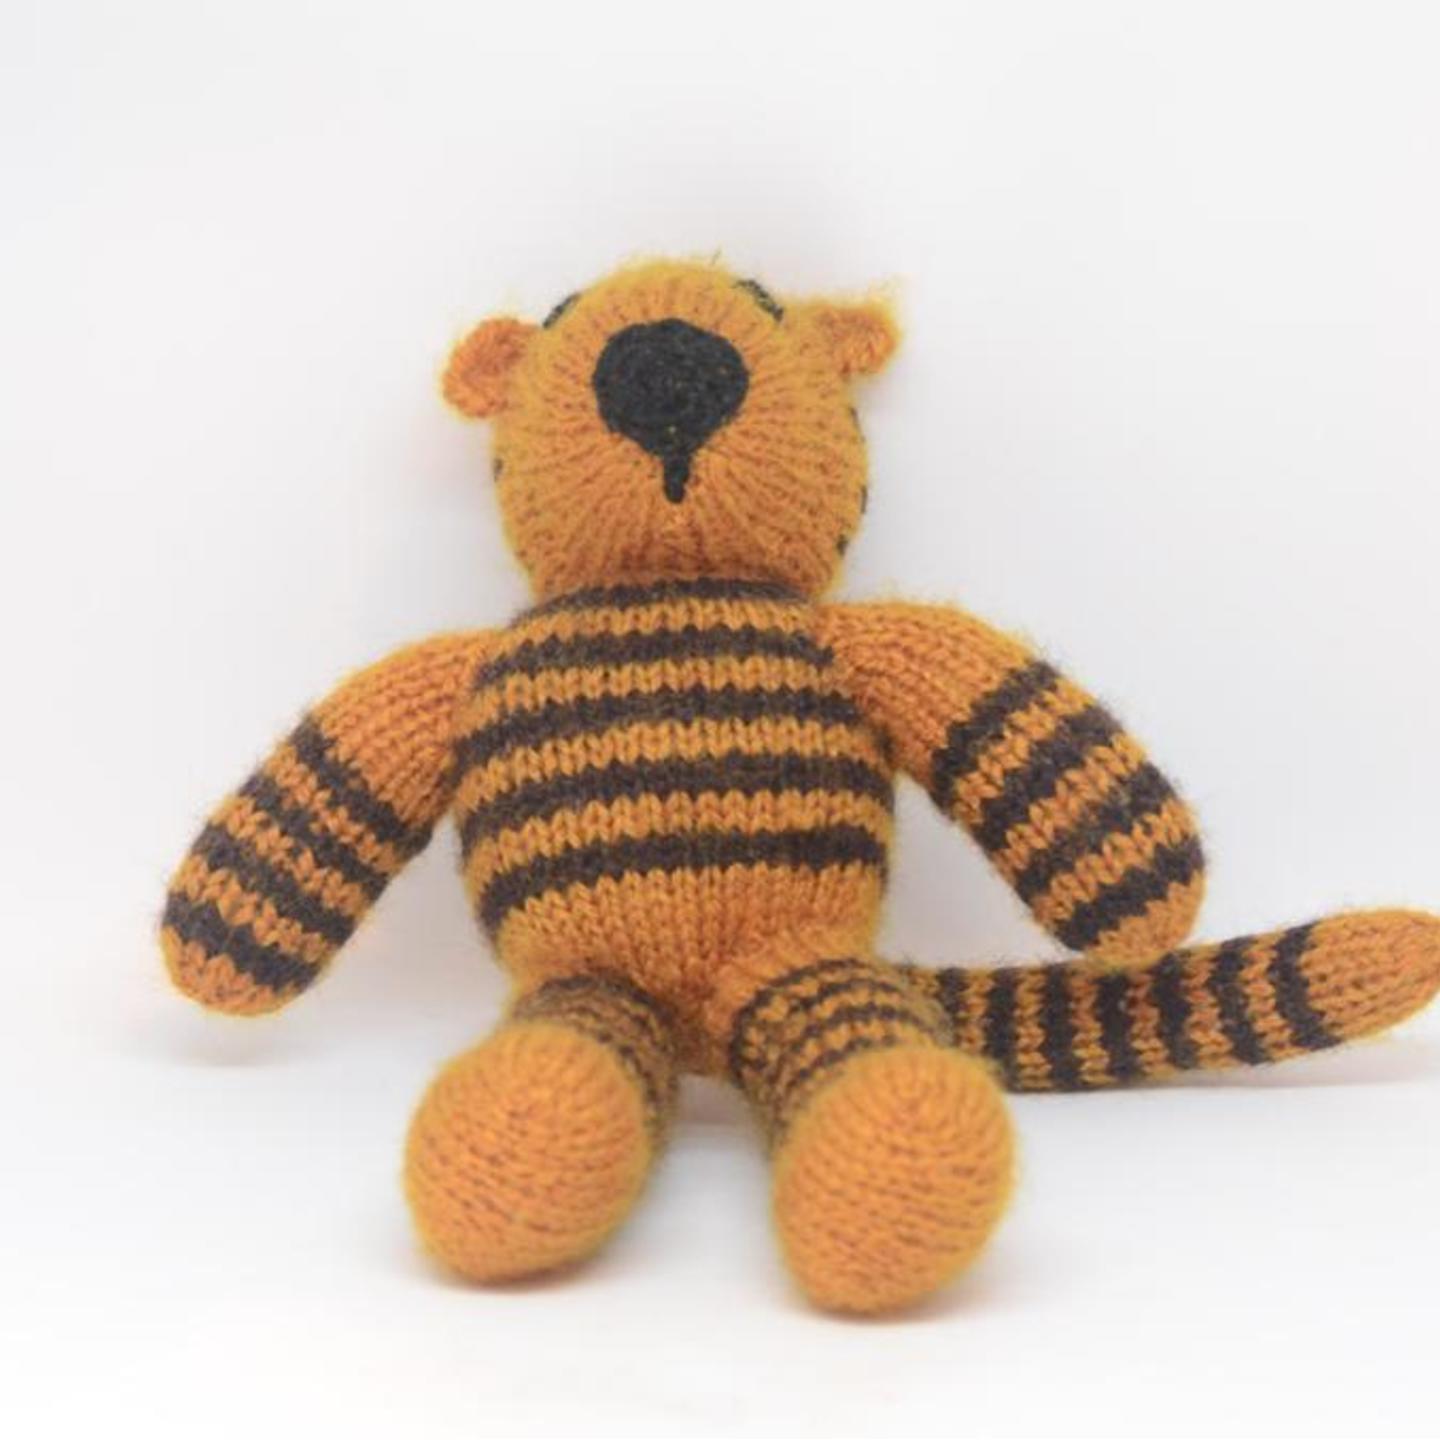 Hand knitted Tiger